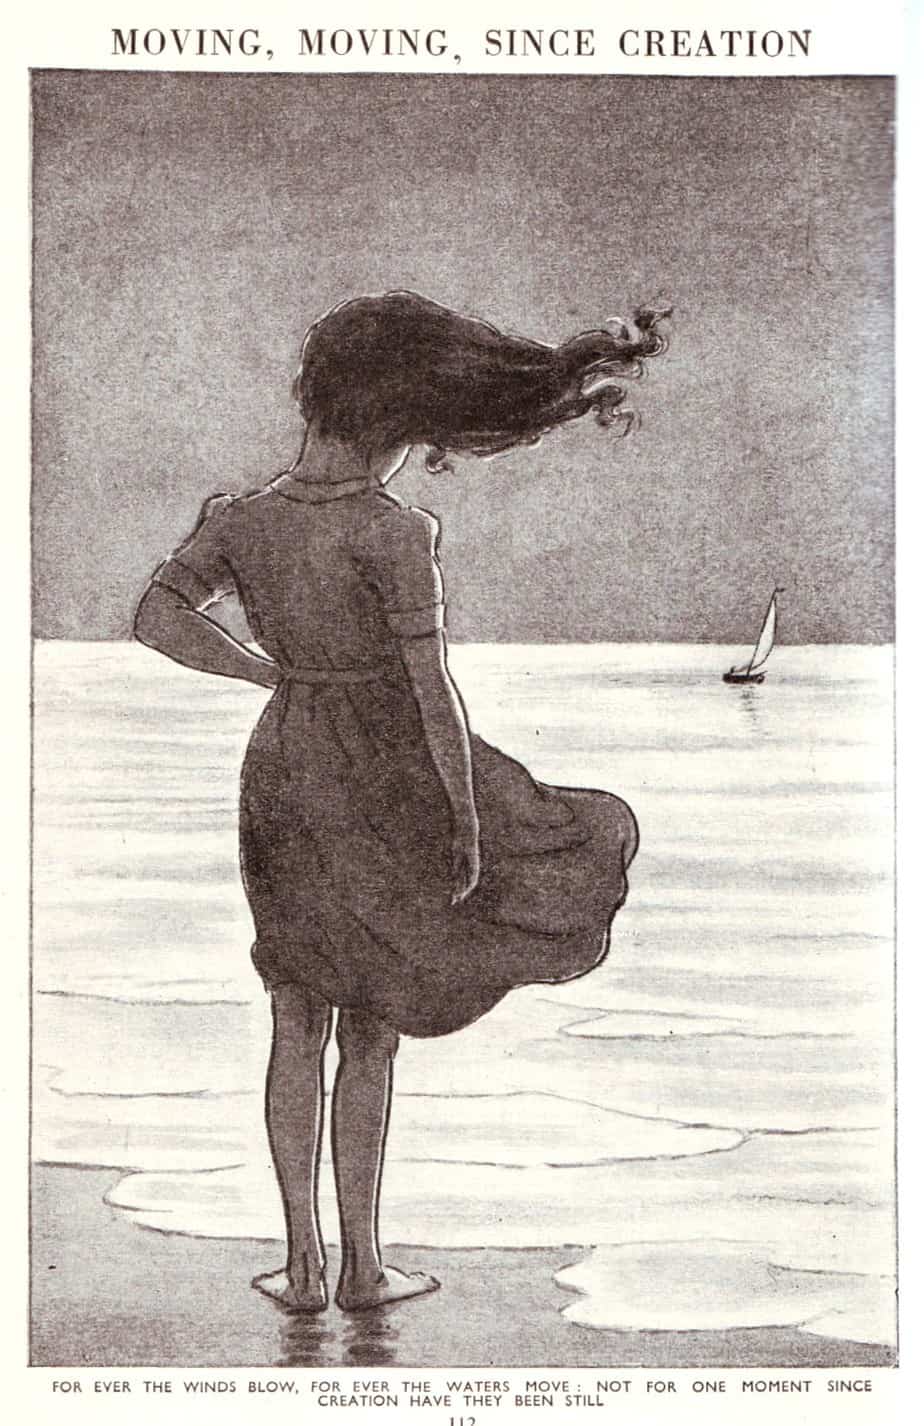 Looking out to sea, From 'The Children's Encyclopedia' published by Arthur Mee